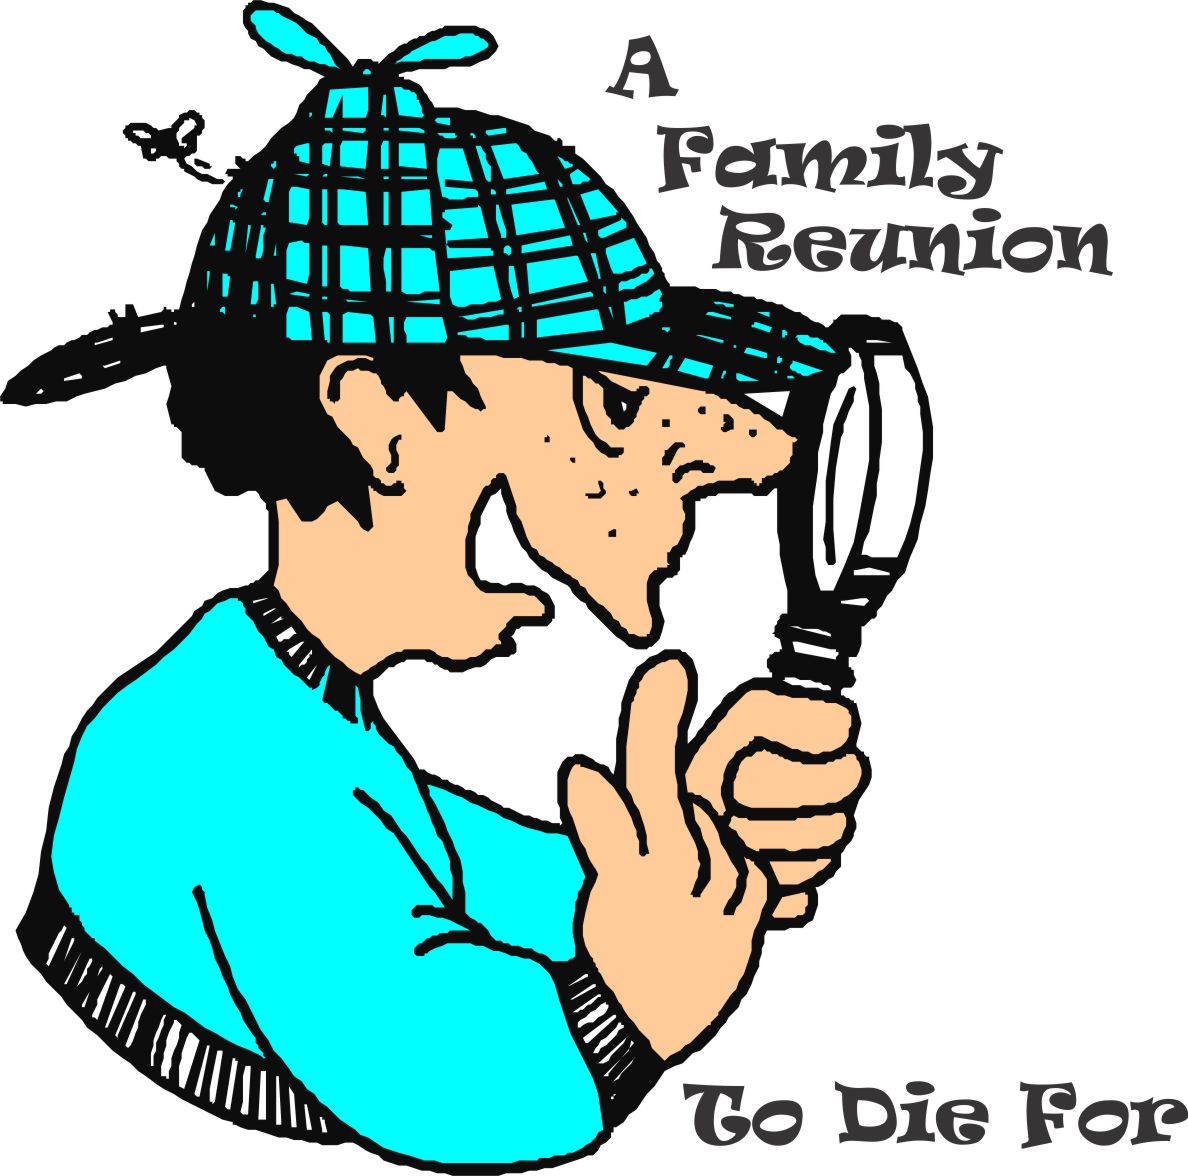 family reunion clipart black and white - photo #36